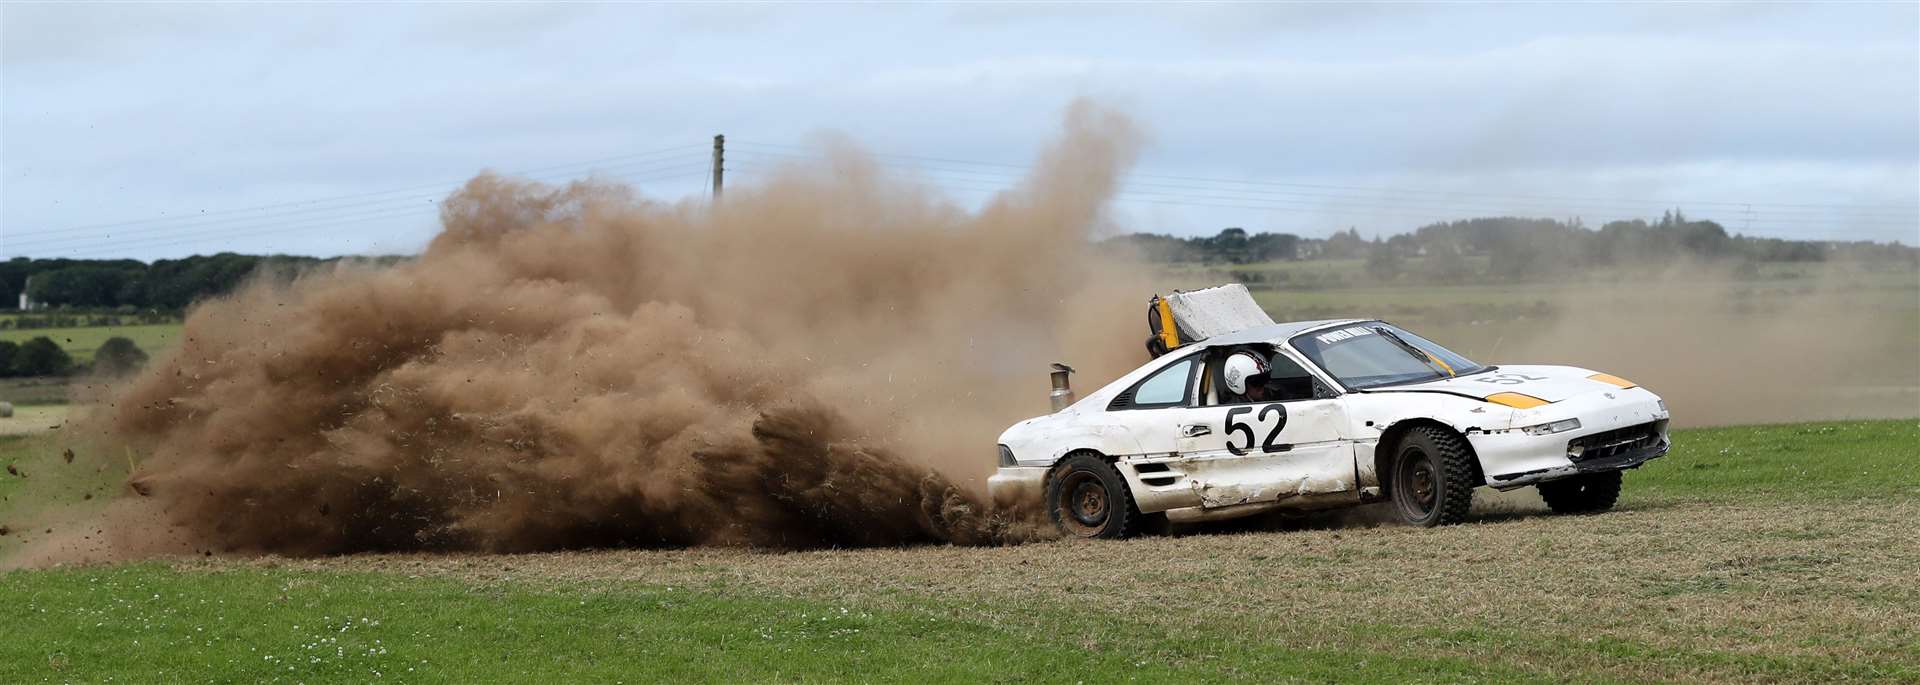 Ronald Gunn creates a dust storm during Saturday's racing in his Toyota MR2. Picture: James Gunn